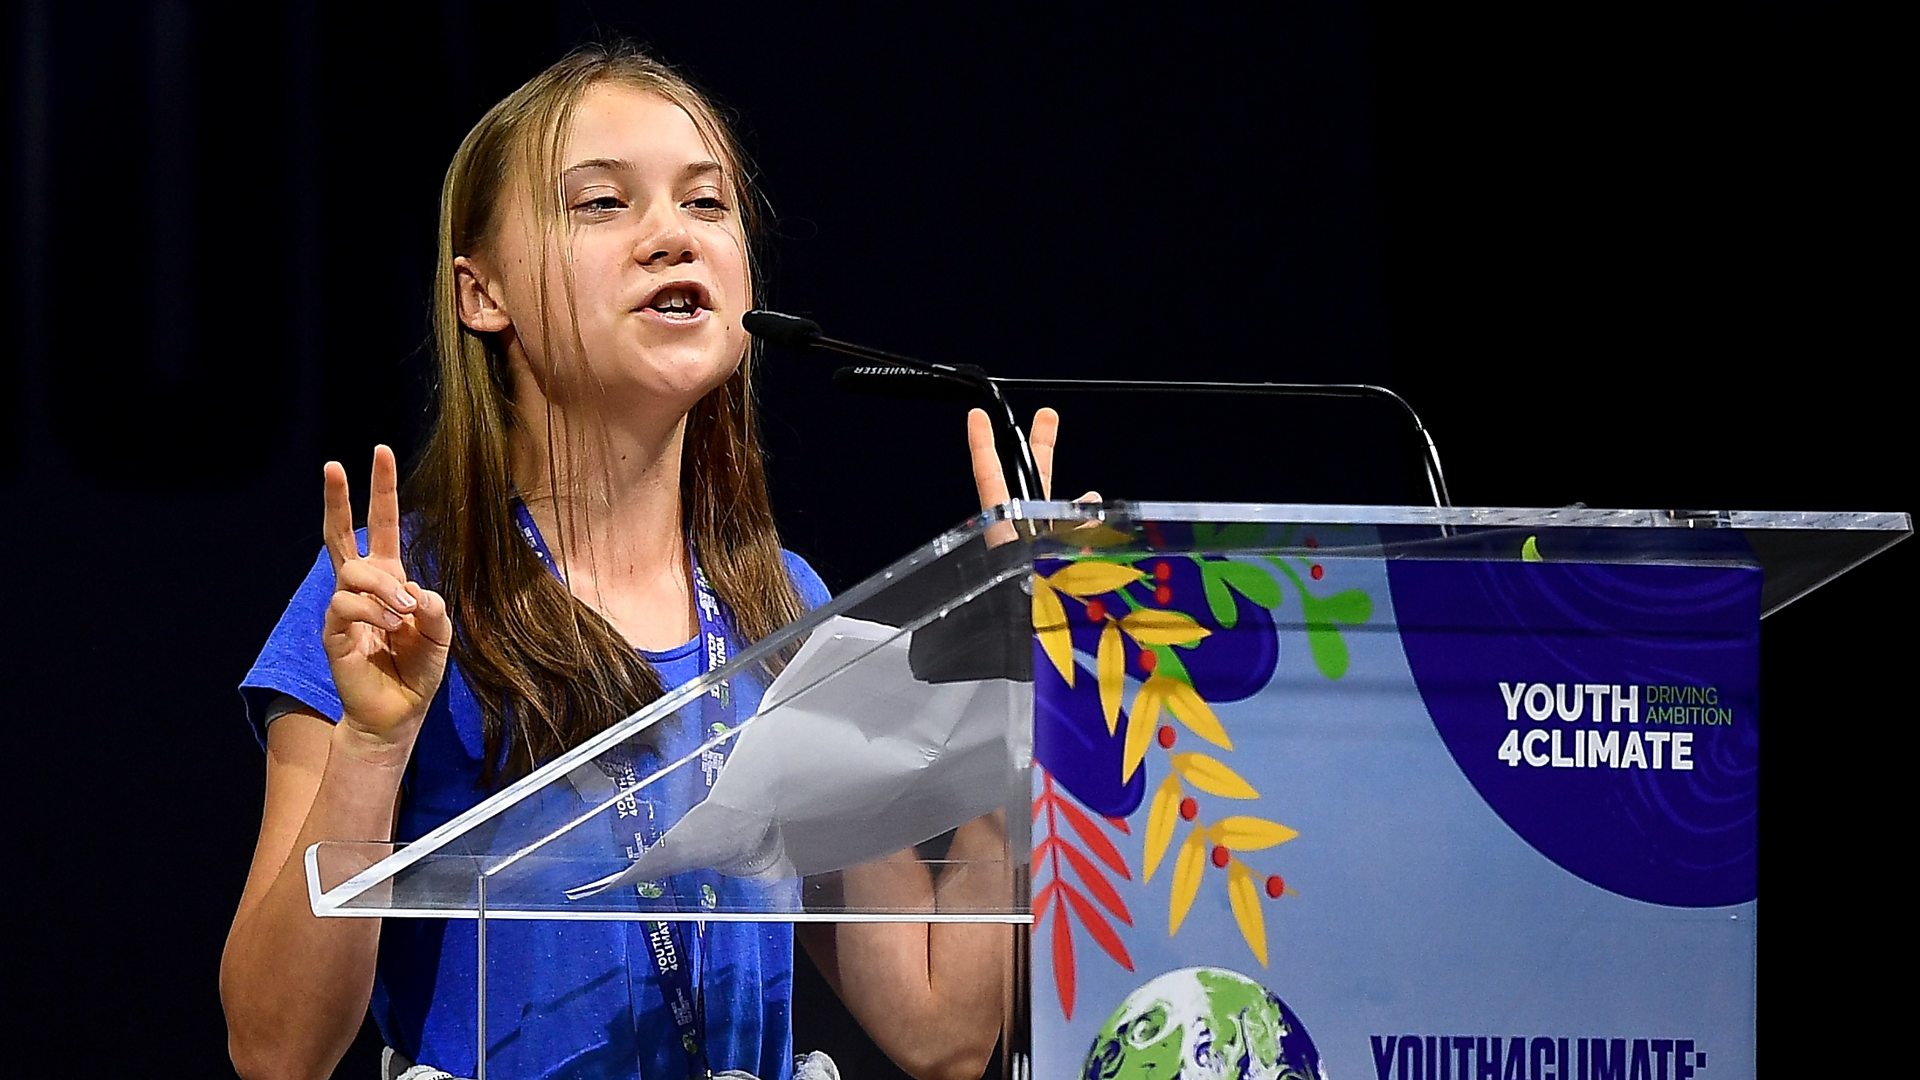 A Potential Rift in the Climate Movement: What's Next for Greta Thunberg? - DER  SPIEGEL